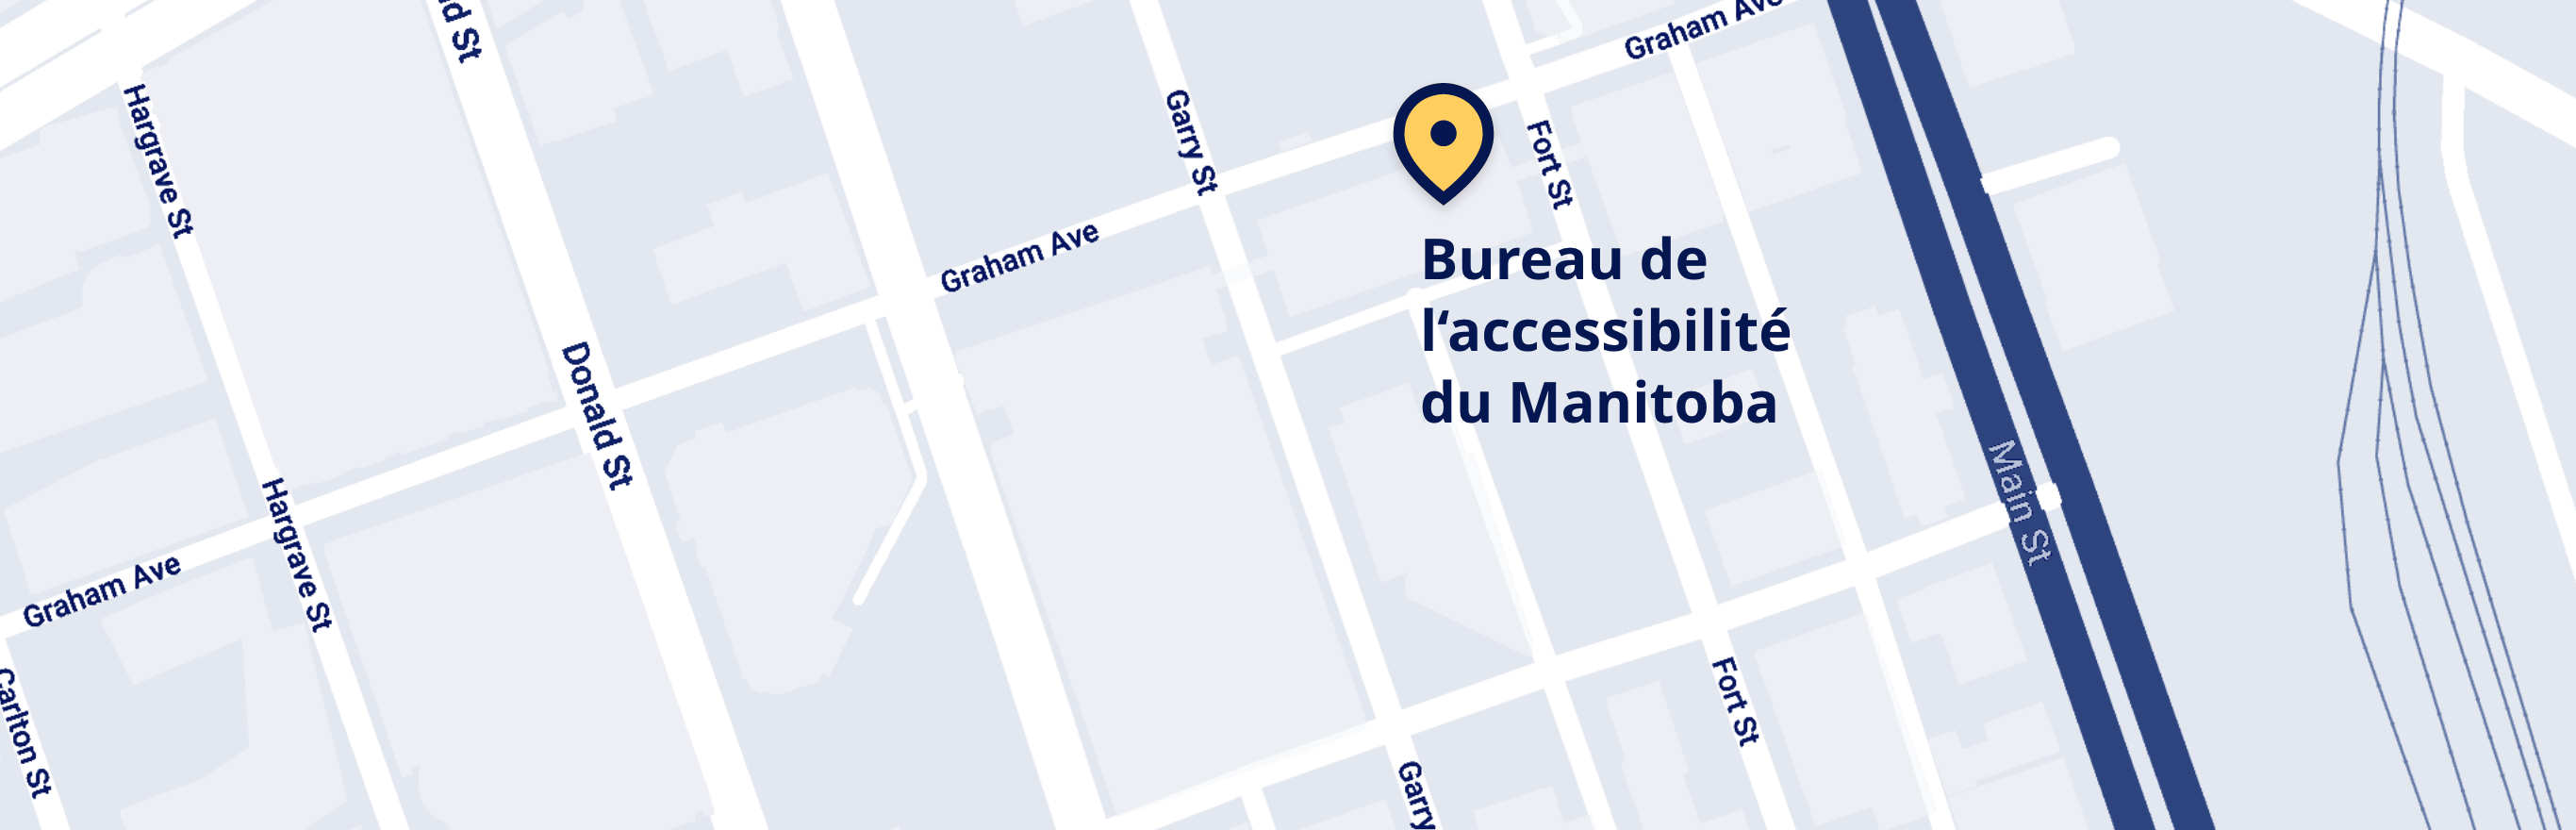 Feature Map of Manitoba Accessibility Office’s Location